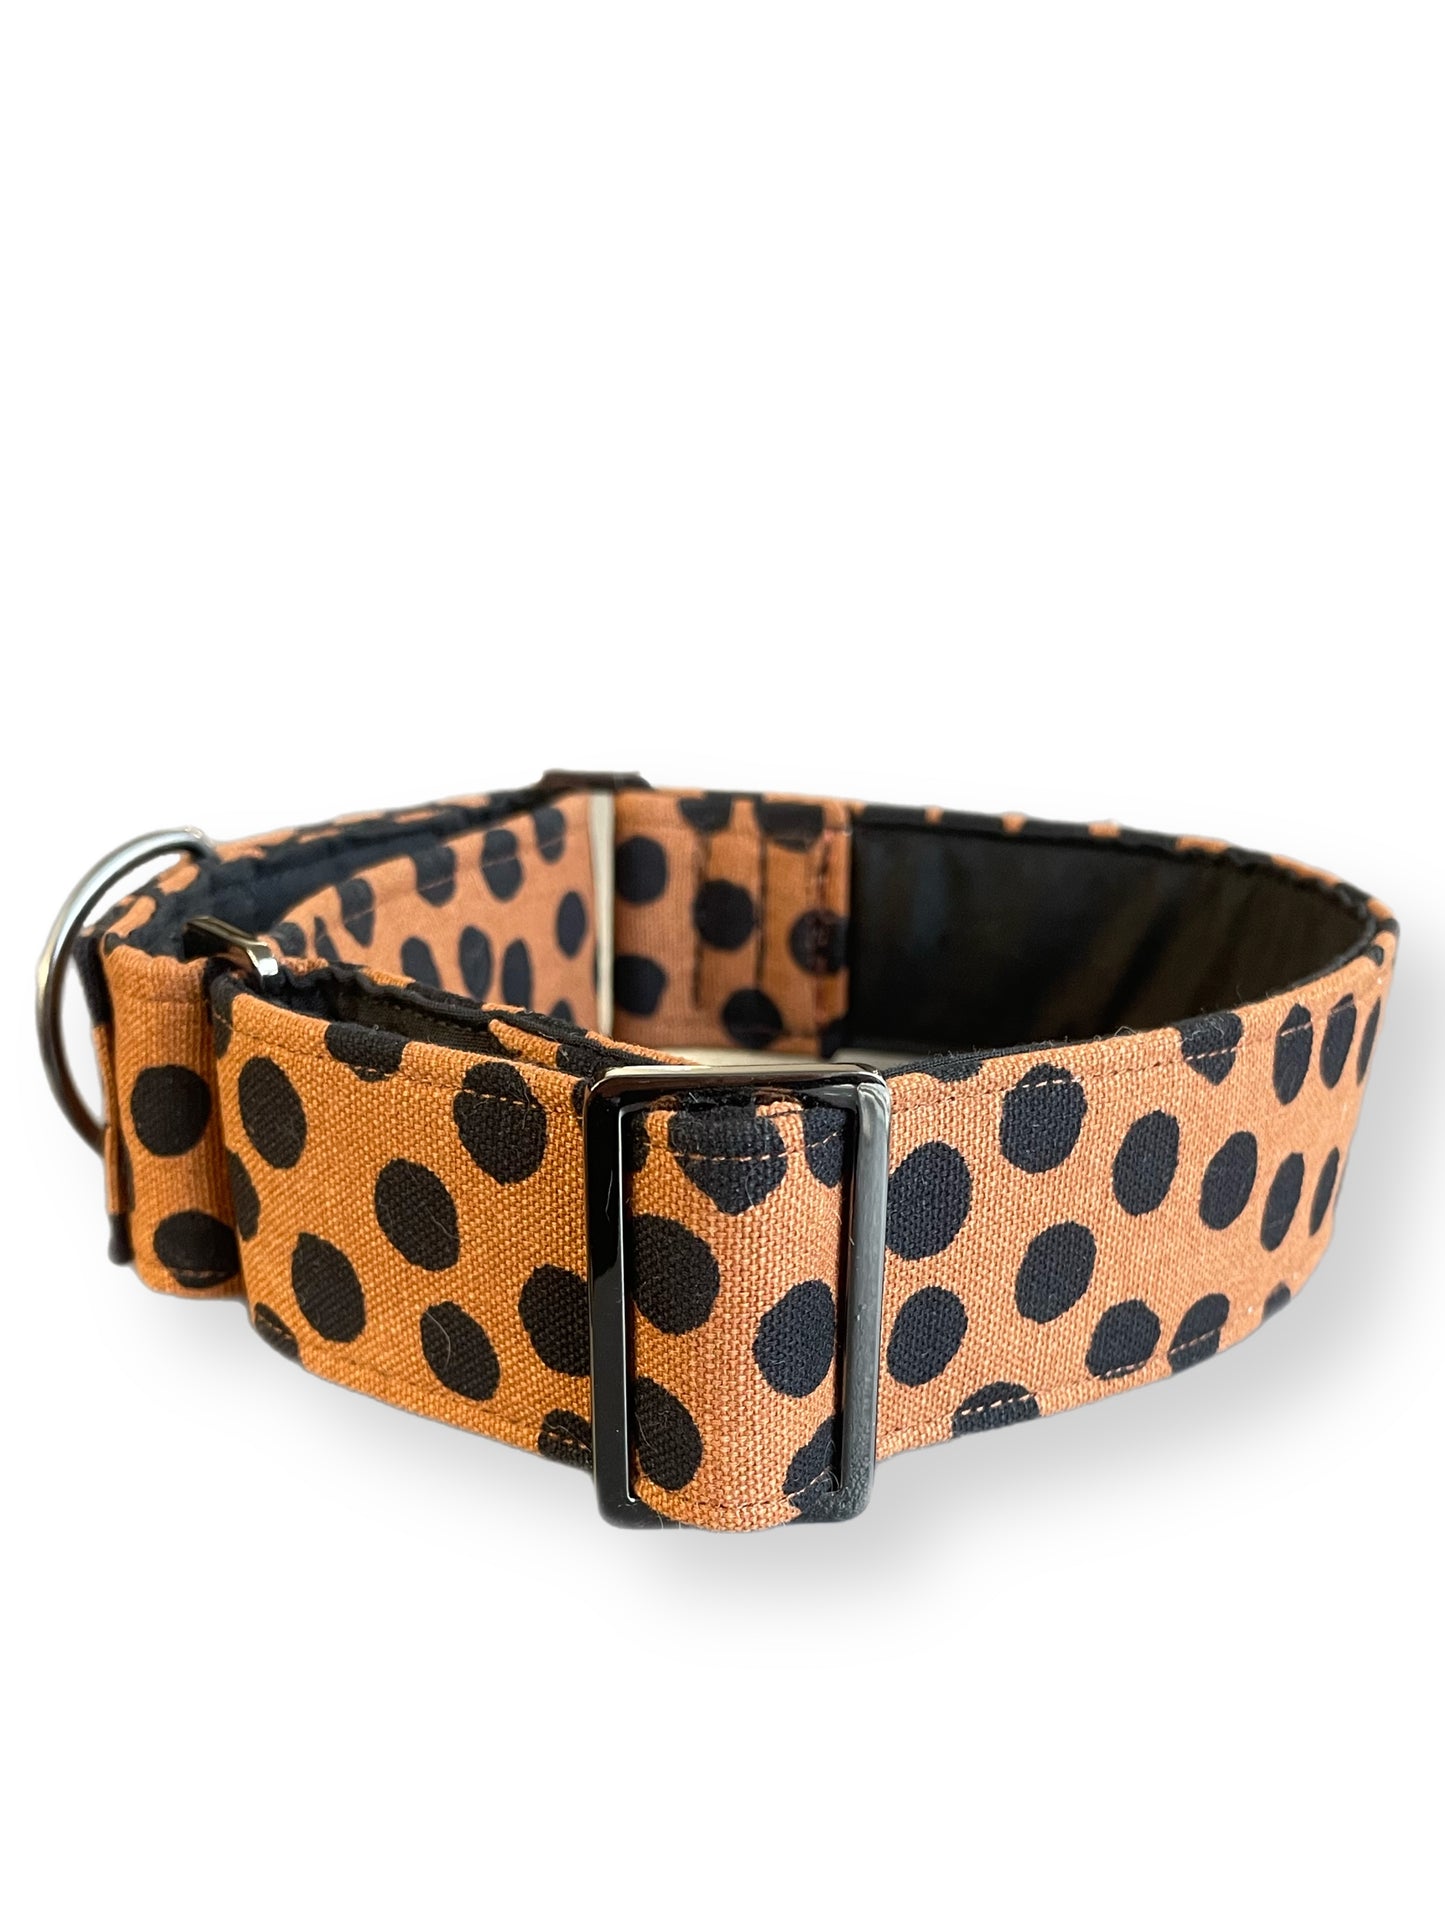 Terracotta with spots greyhound Martingale collar cotton covered wide